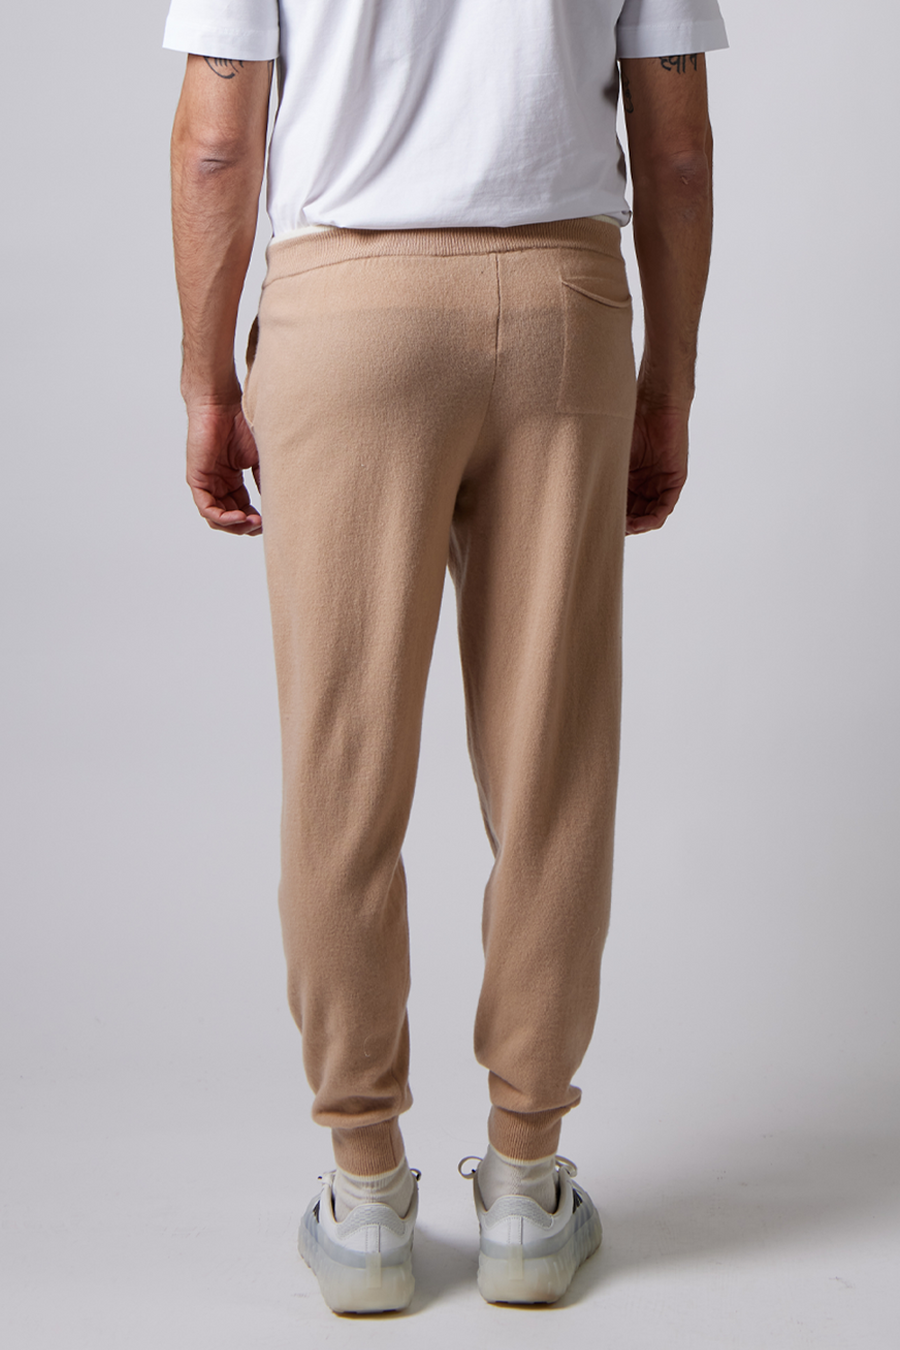 Buy the Daniele Fiesoli Wool Sweatpants Beige at Intro. Spend £50 for free UK delivery. Official stockists. We ship worldwide.